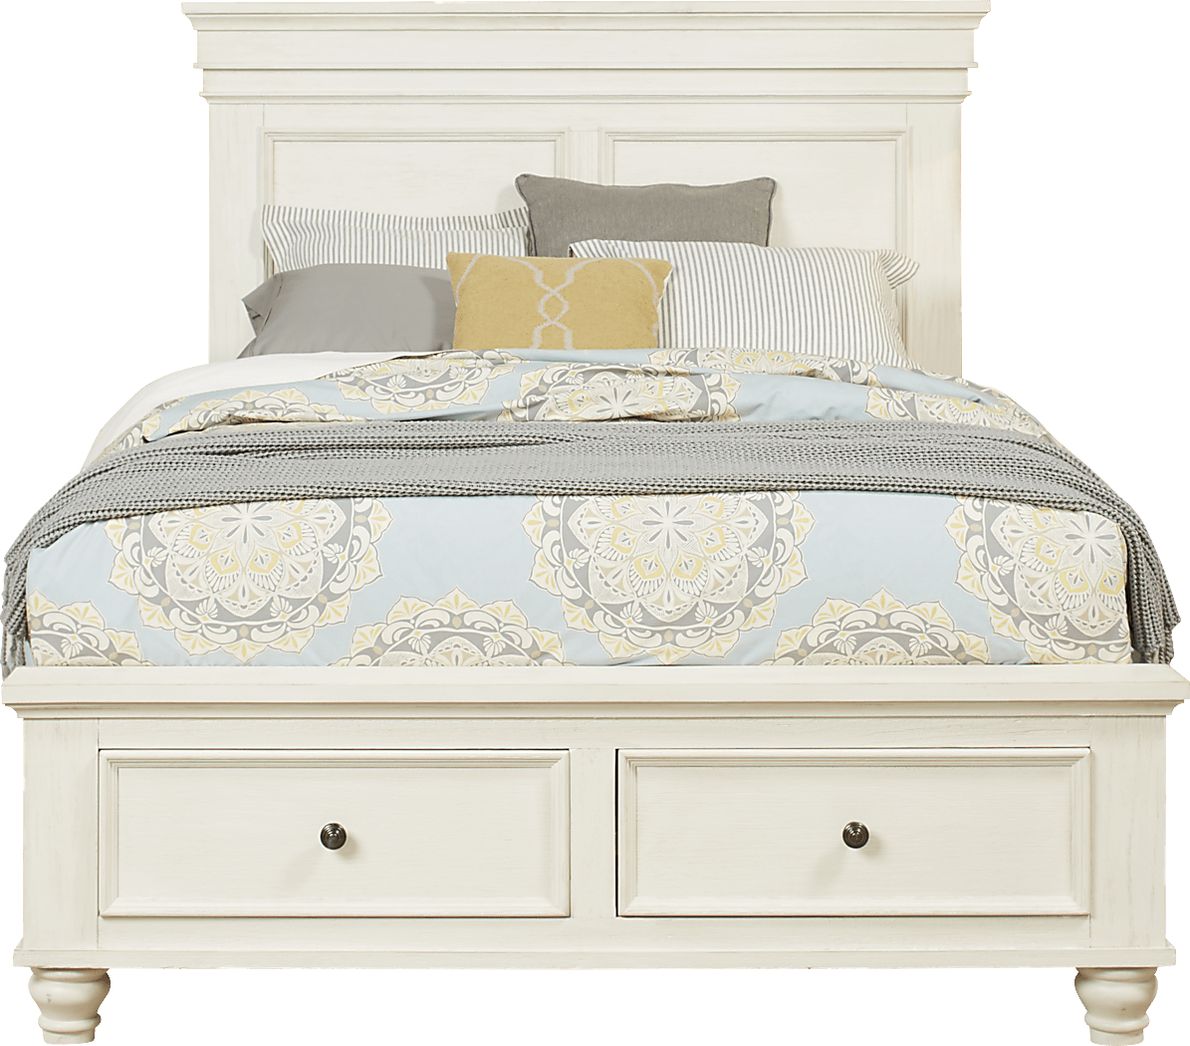 Lake Town Off-White 5 Pc Queen Panel Bedroom with Storage